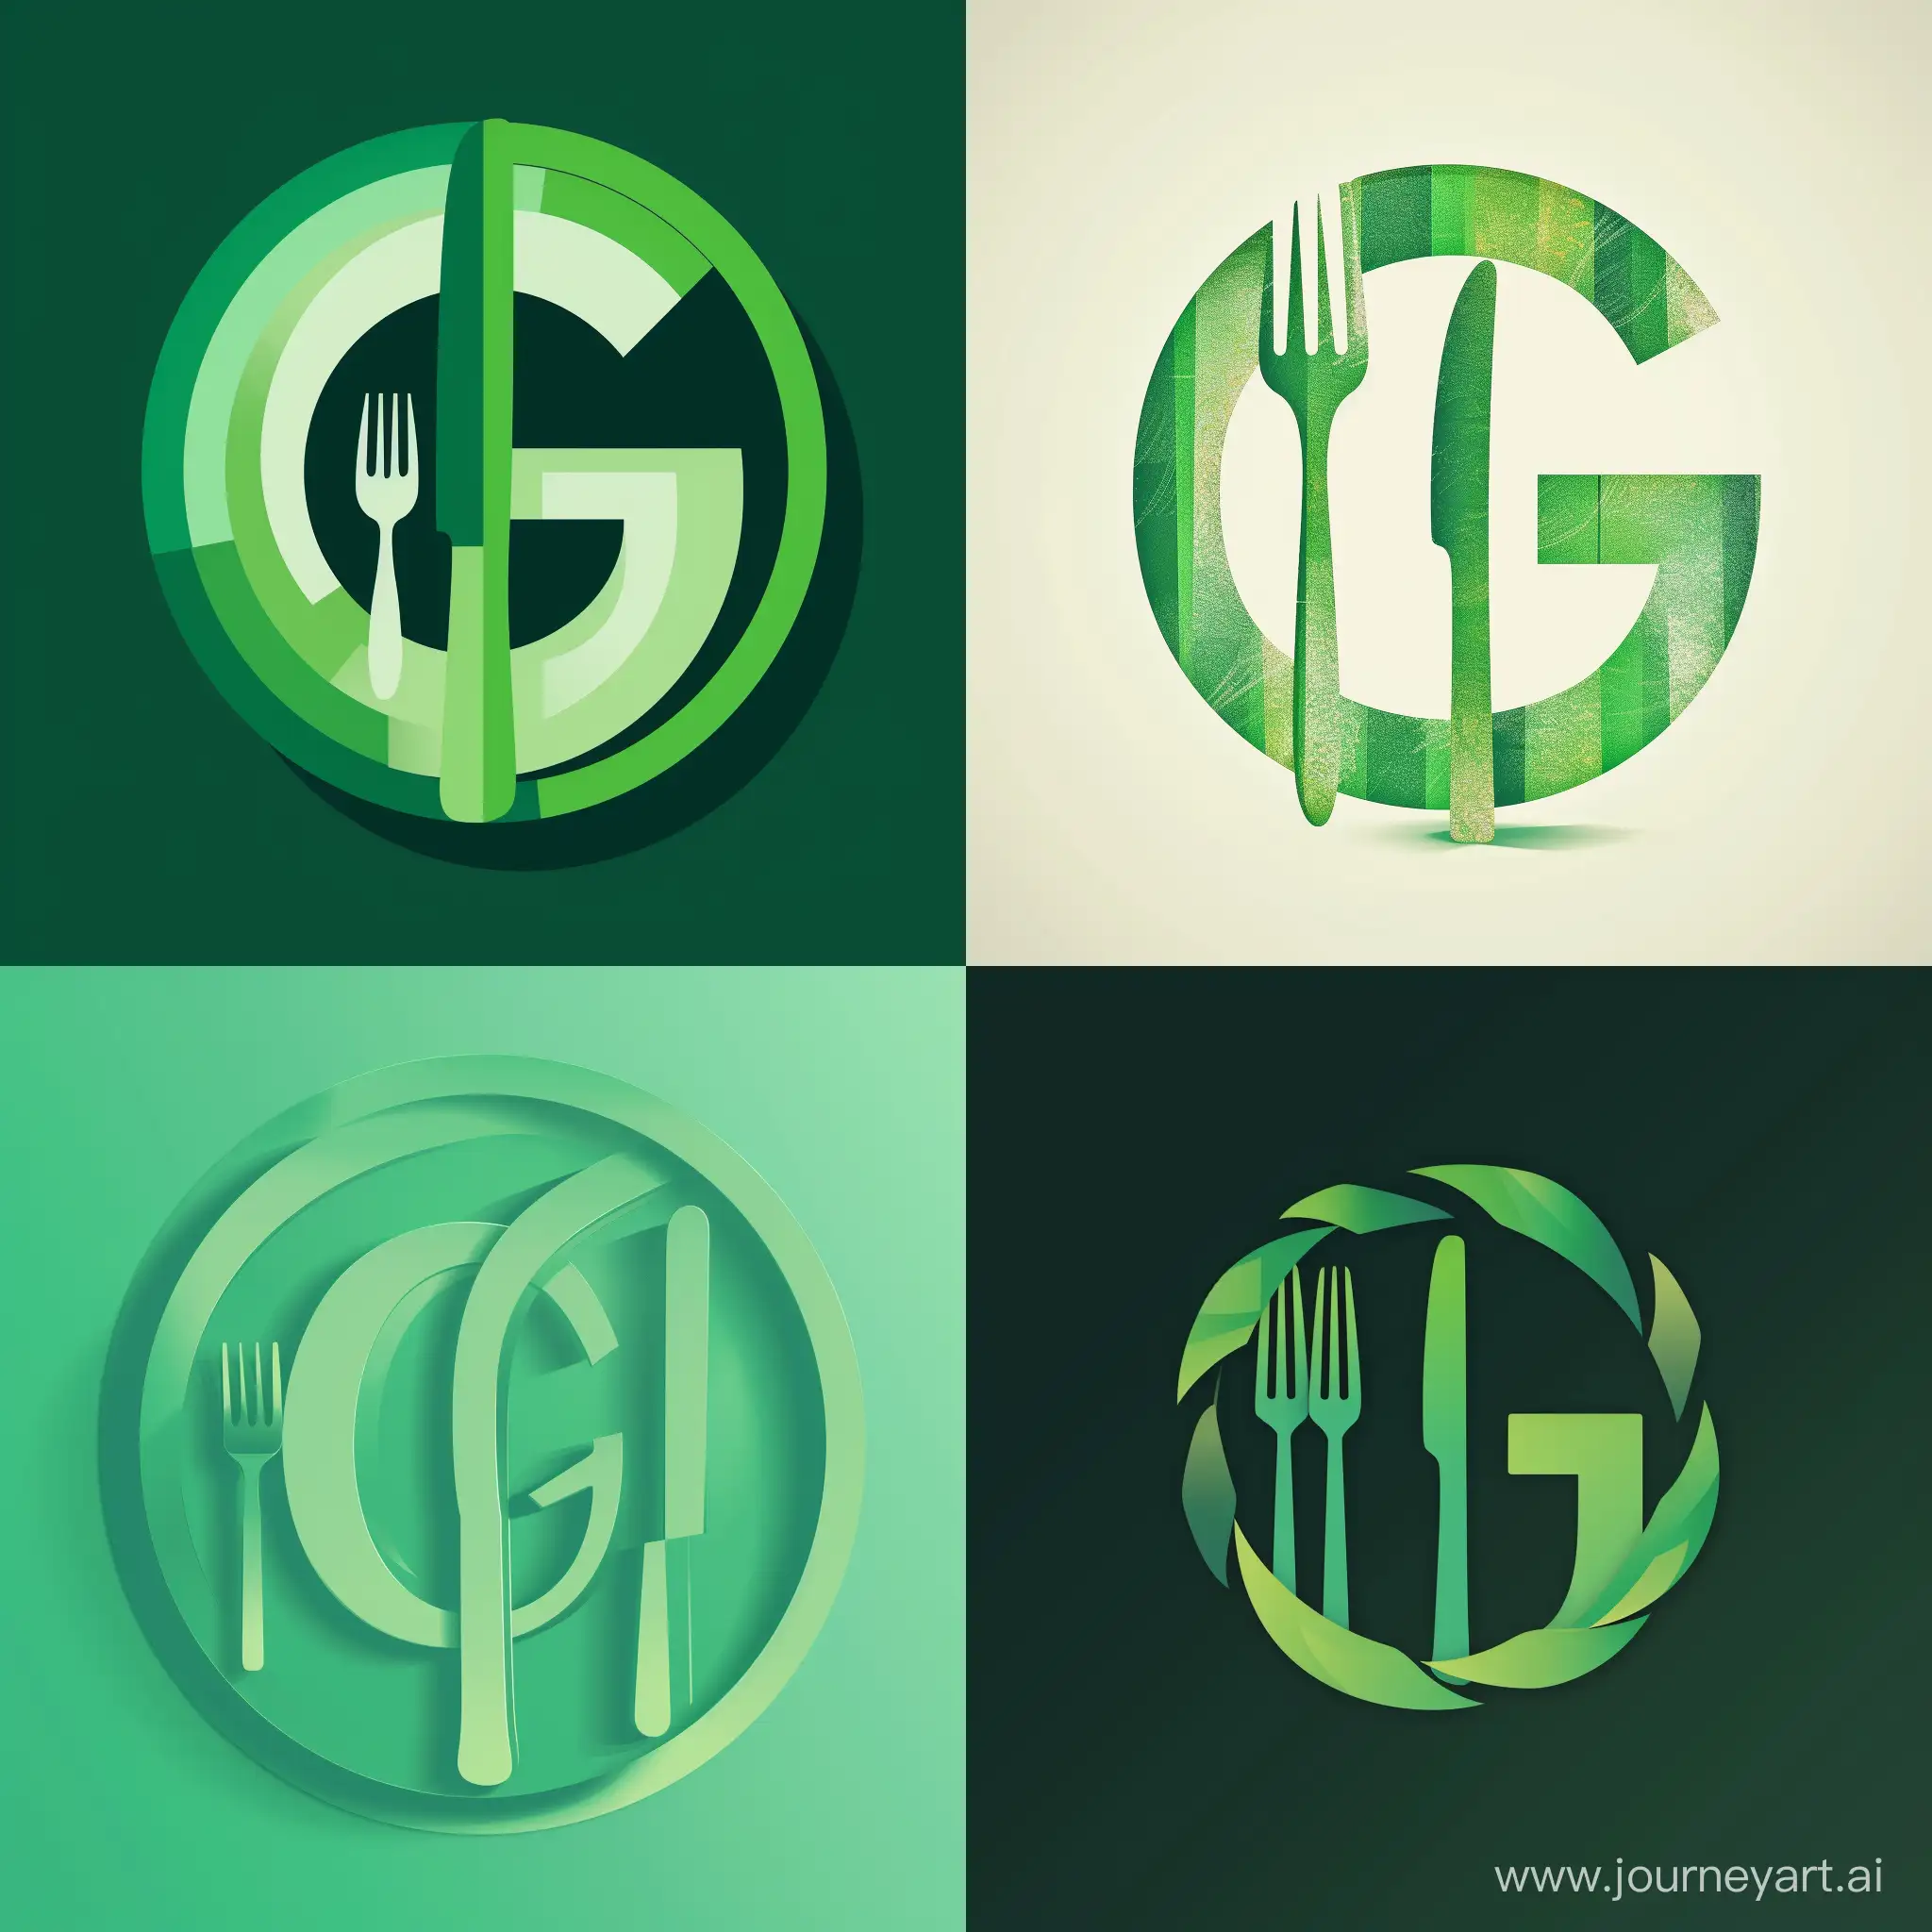 Circular-Green-Overlapping-IG-Logo-with-Subtle-Fork-and-Knife-Integration